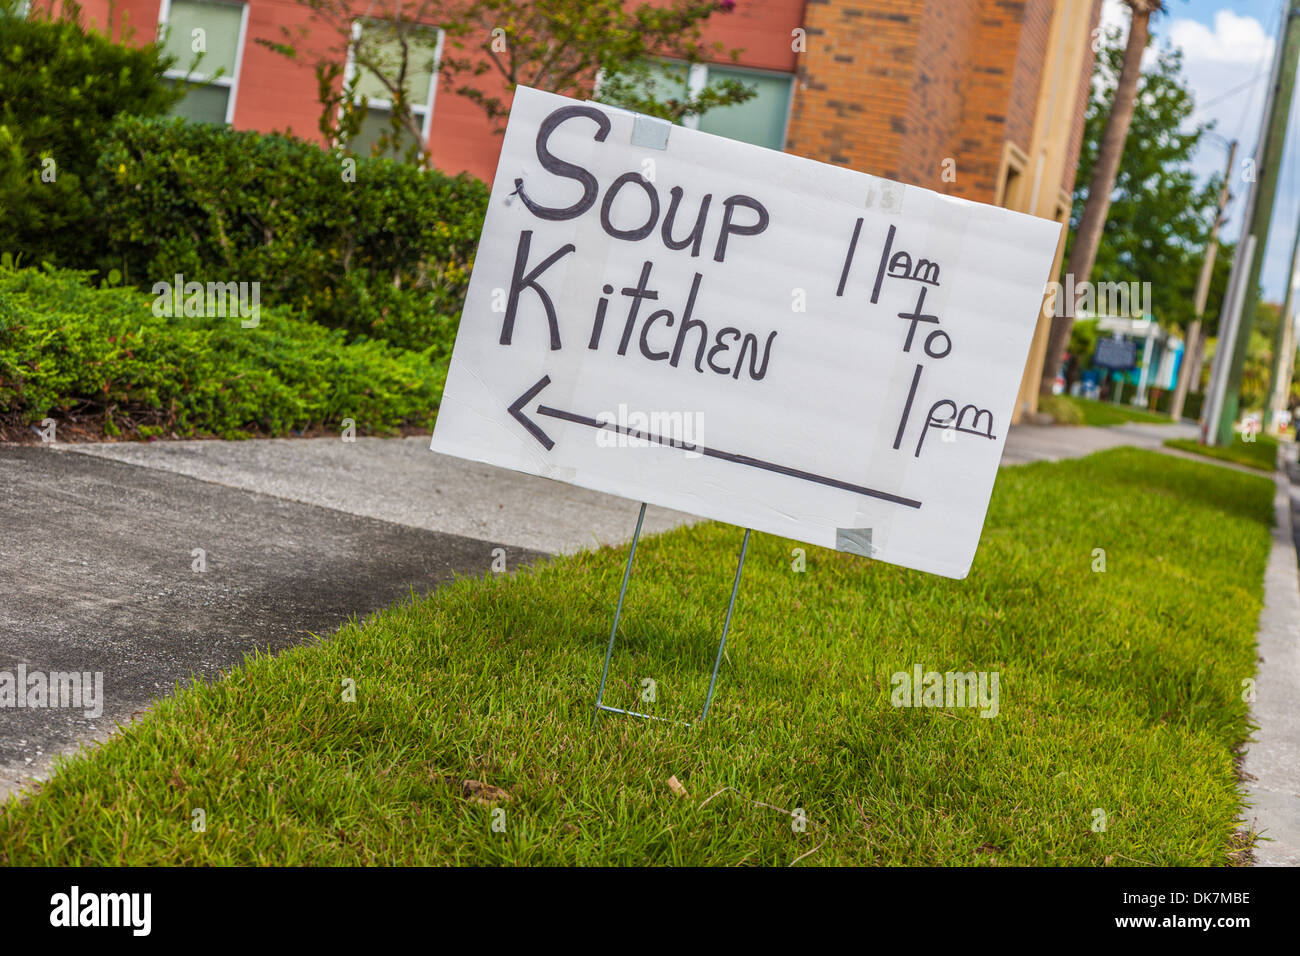 Soup Kitchen sign at a church in Green Cove Springs, Florida Stock Photo